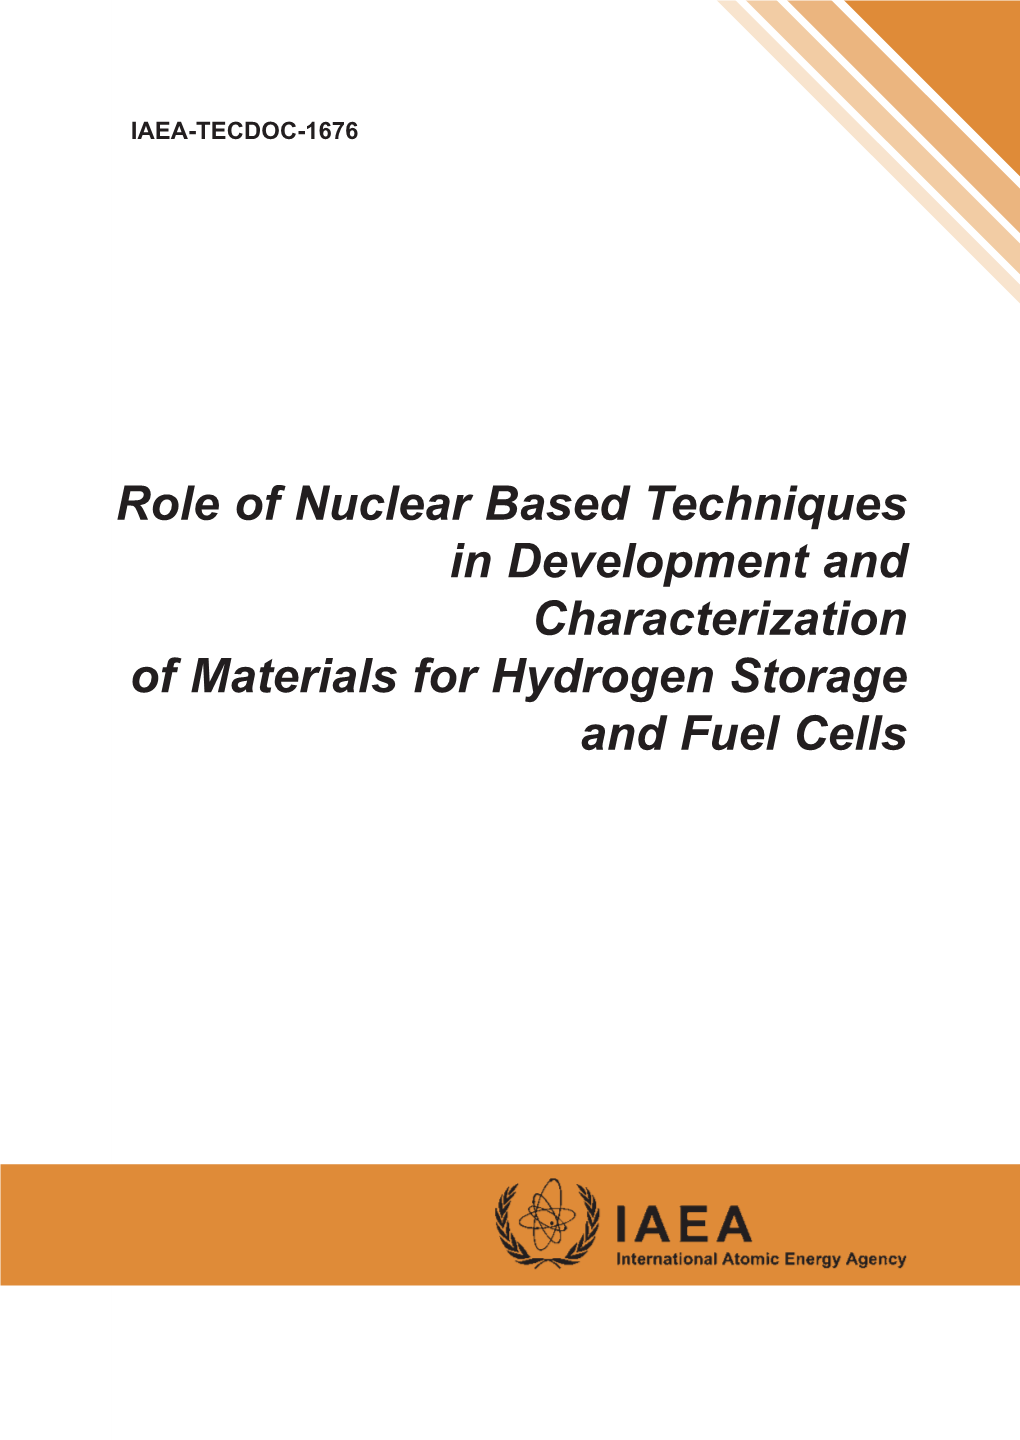 Role of Nuclear Based Techniques in Development and Characterization of Materials for Hydrogen Storage and Fuel Cells